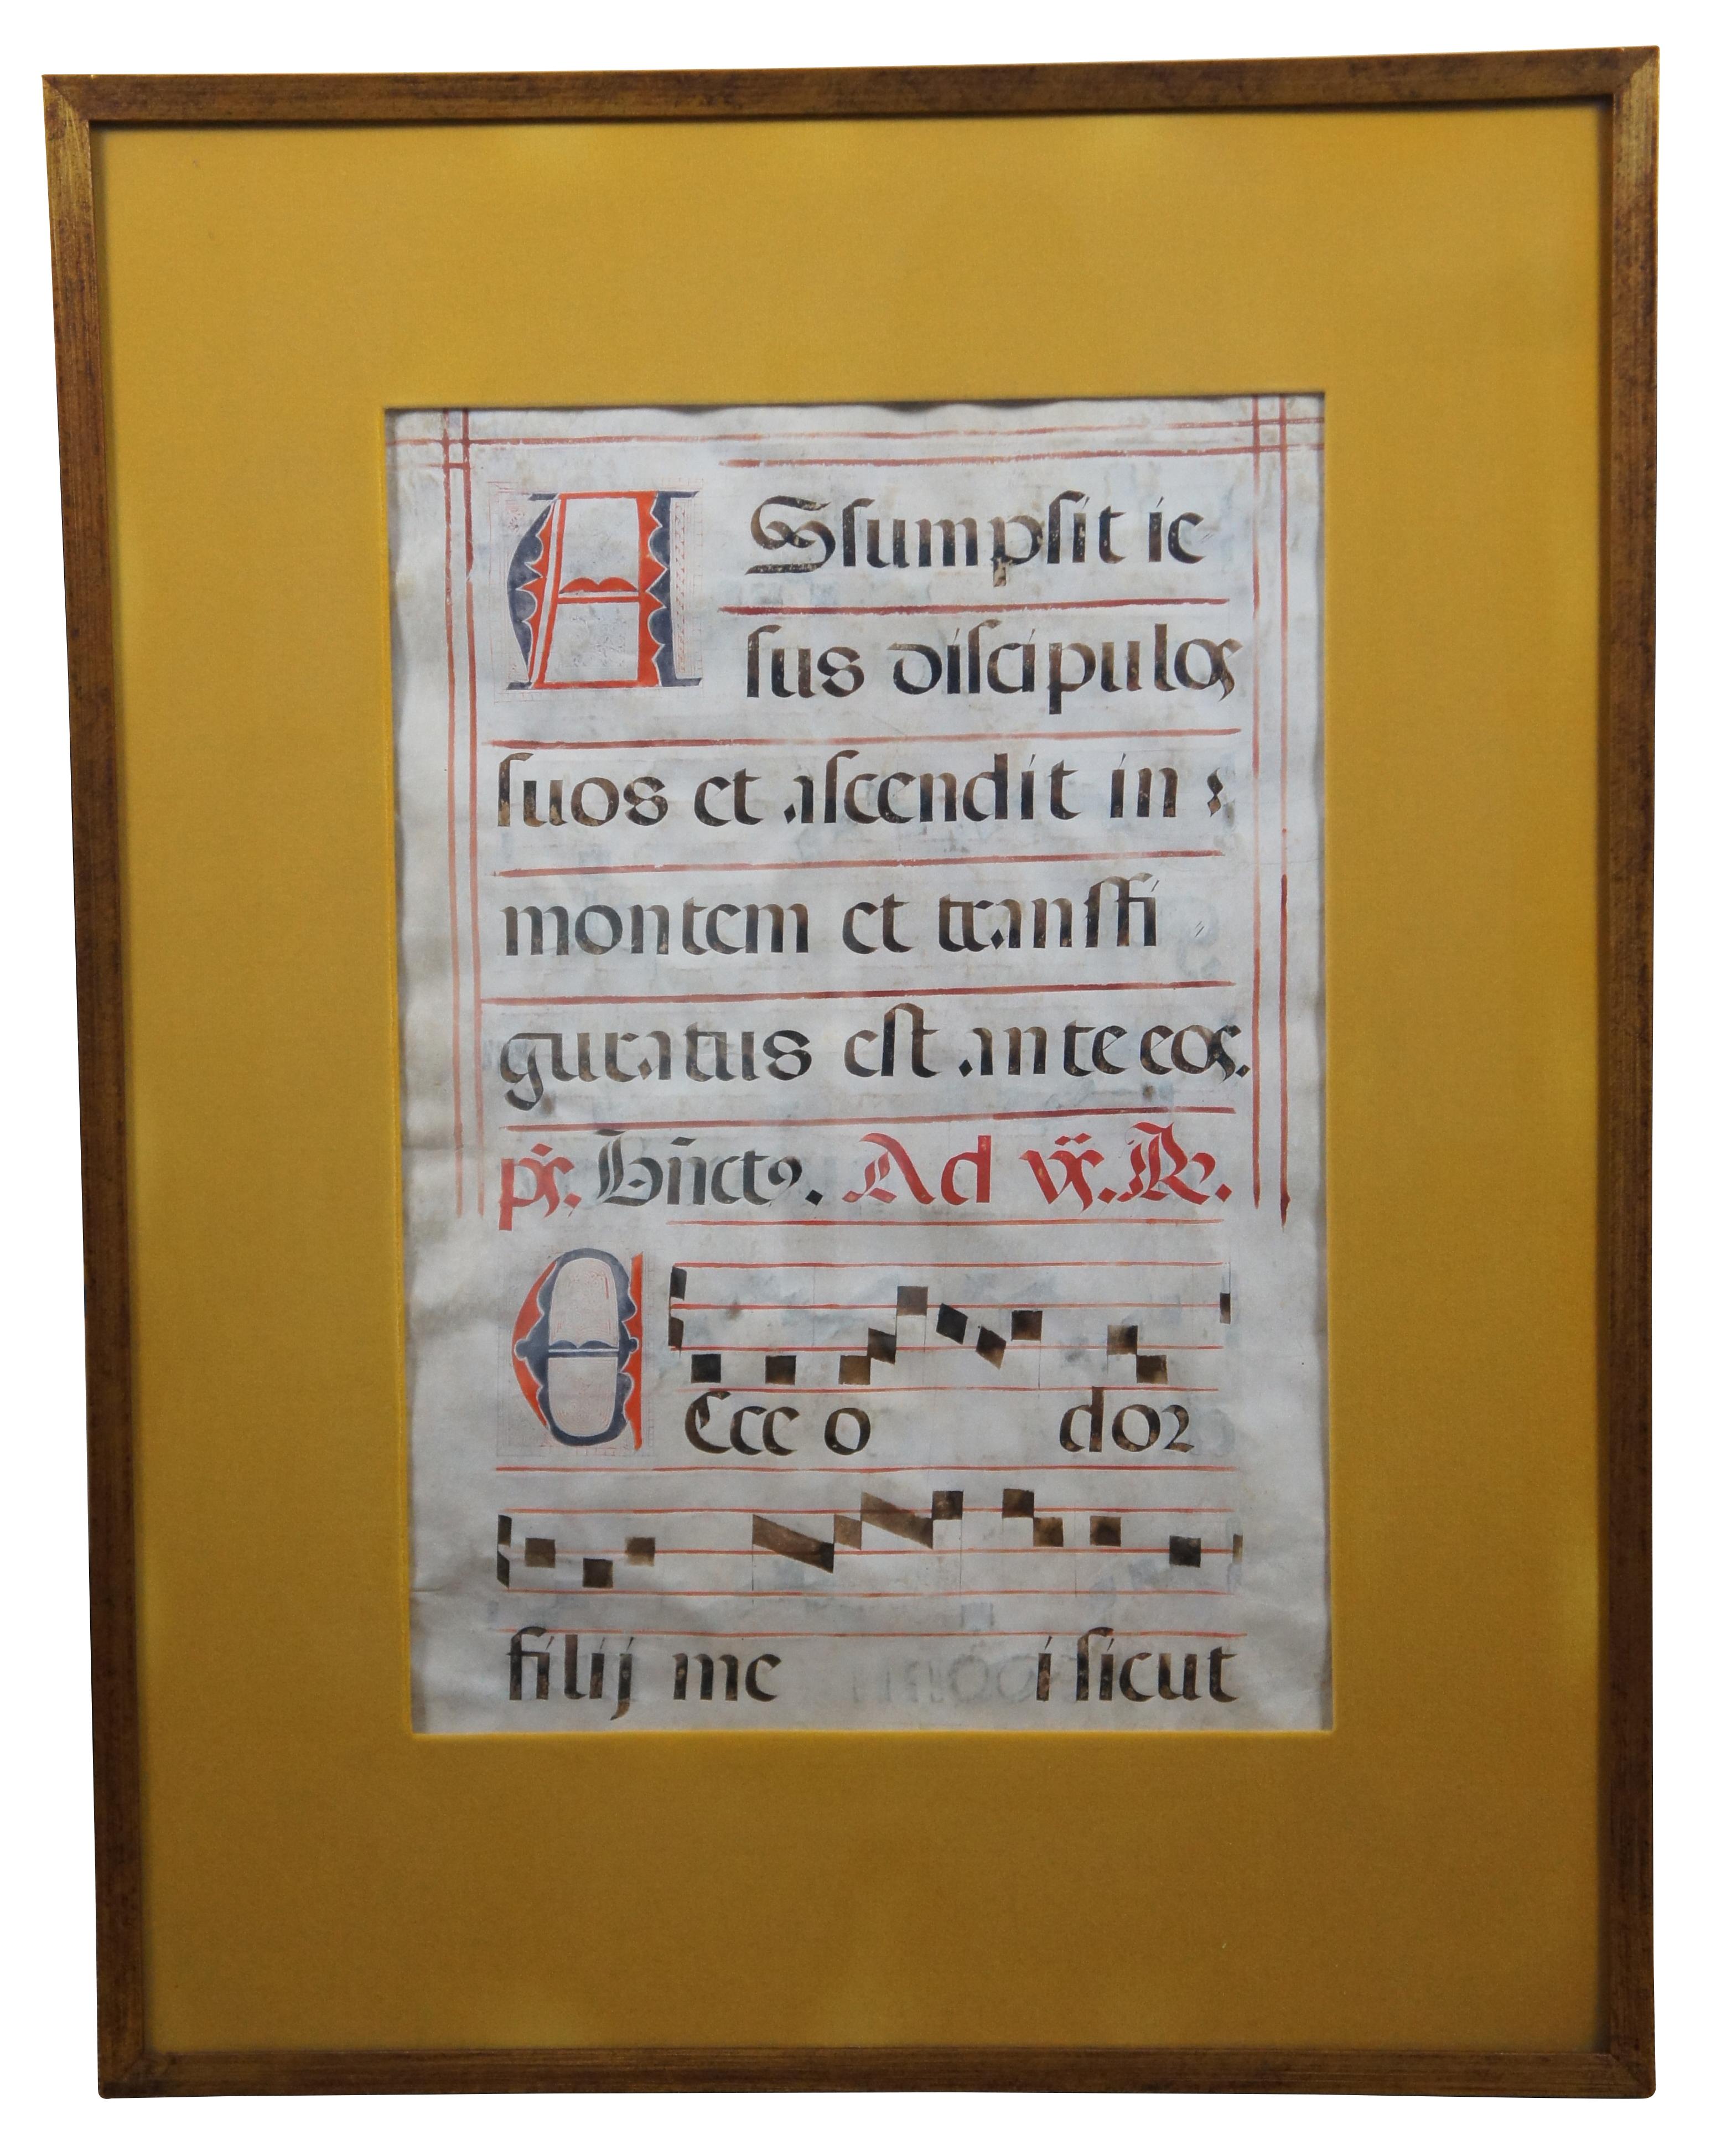 Pair of framed antique 17th century Roman Catholic antiphonal music sheets, hand drawn on vellum with illuminated capitals.

Measures: 28.25” x 1.75” x 36.5” / sans frame - 16.75” x 24” (width x depth x height).